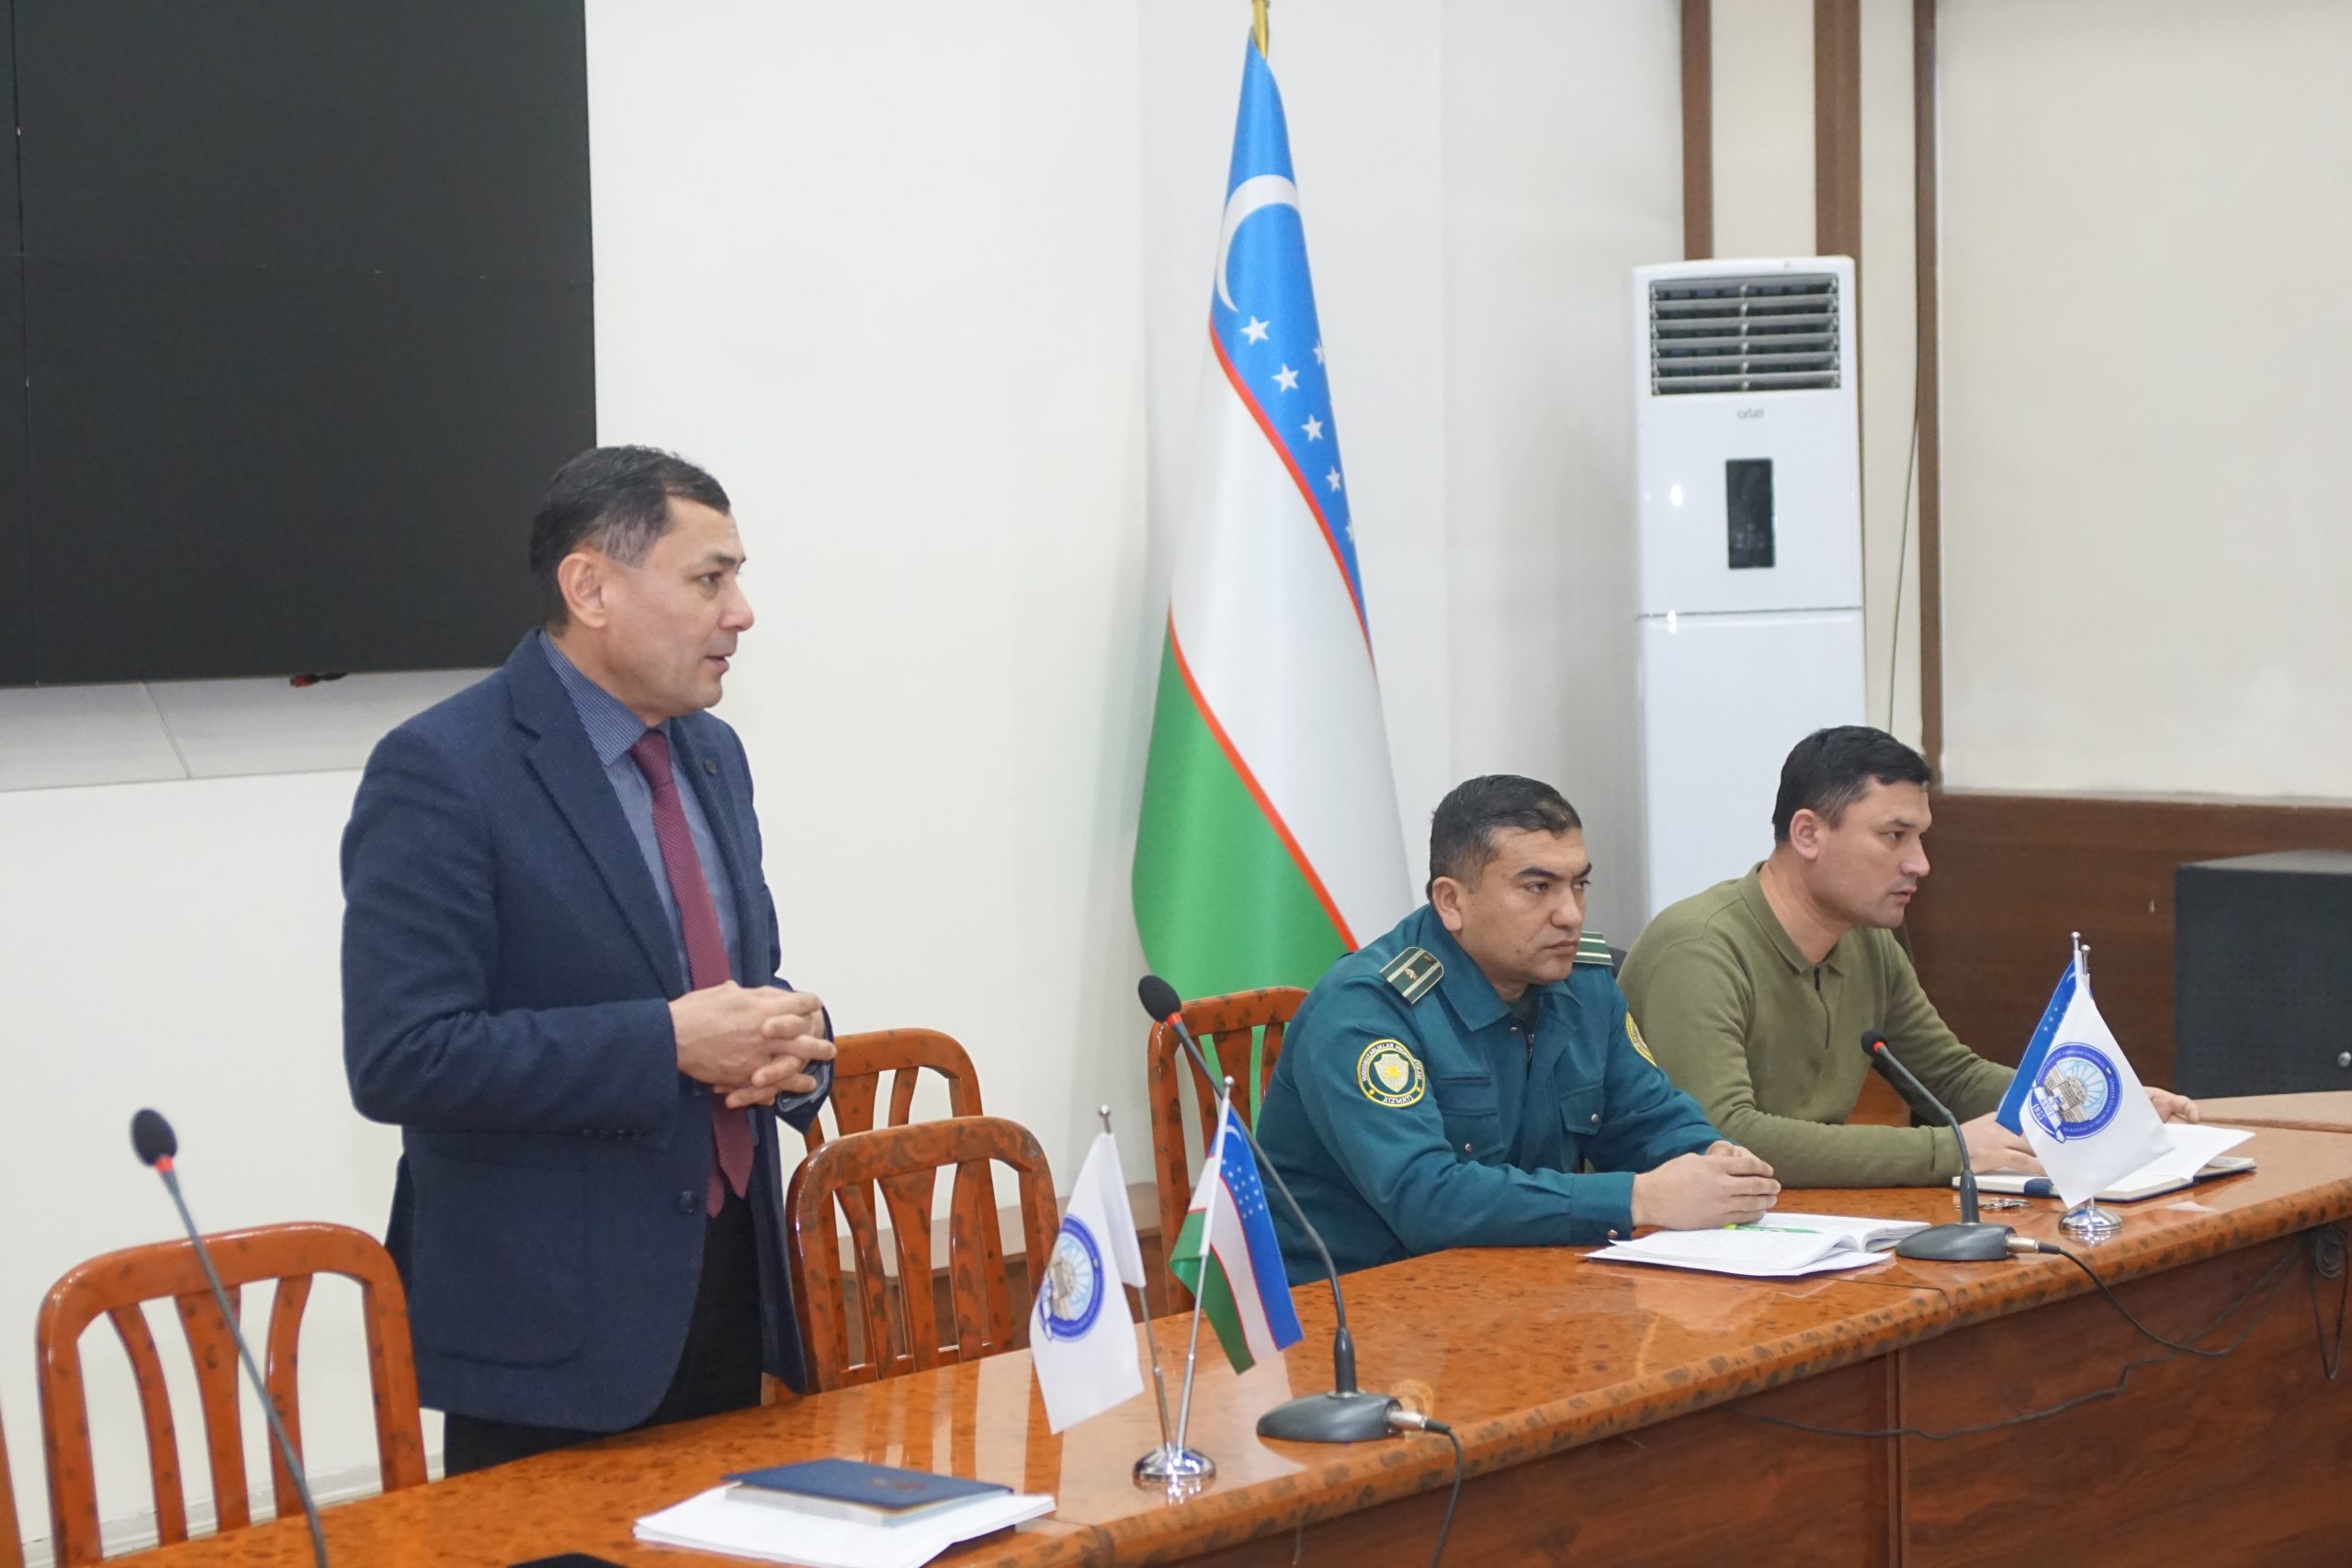 RULES OF BEHAVIOUR AND ETHICS WERE INTRODUCED TO PROFESSORS-TEACHERS STAFF OF ANDIJAN STATE MEDICAL INSTITUTE